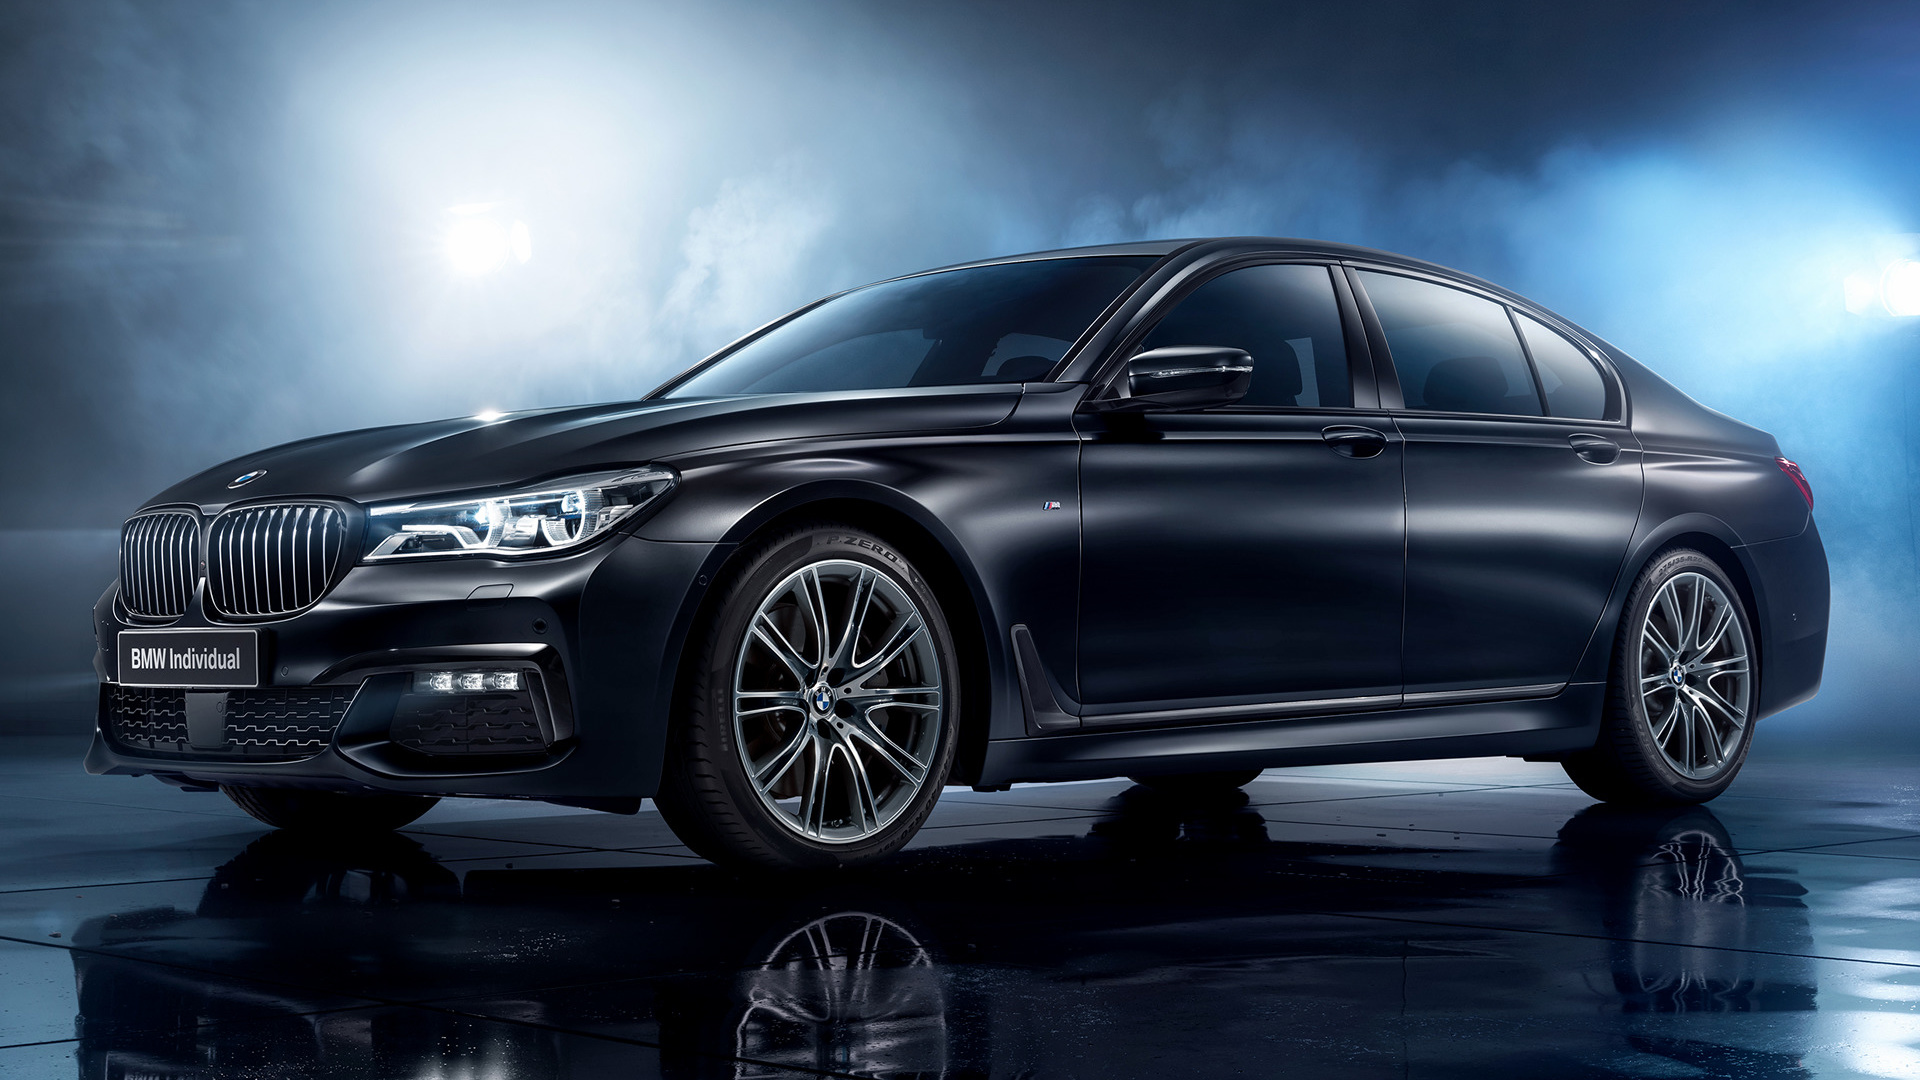 vehicles, bmw 7 series, black car, bmw for android